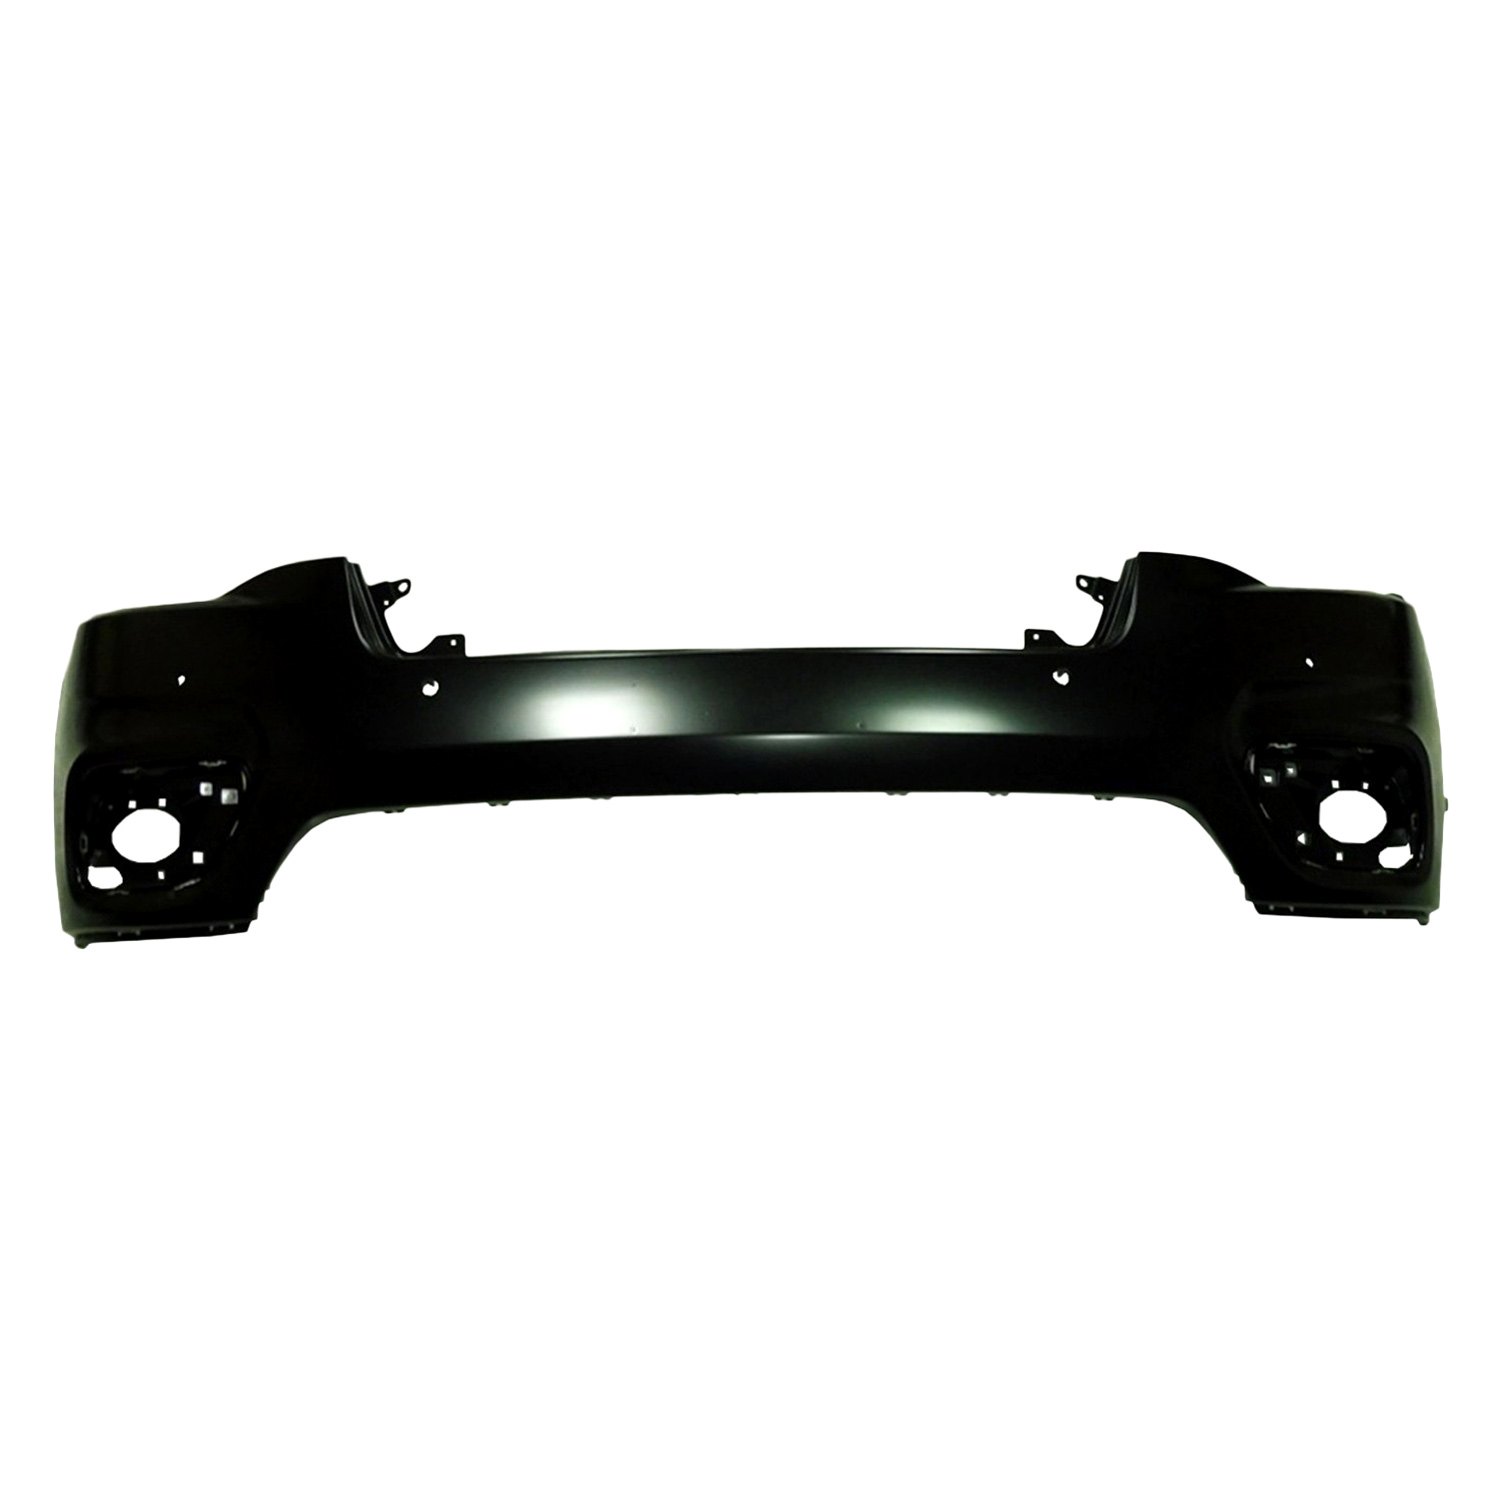 Replace® Ch1014134 Front Upper Bumper Cover Standard Line 0854